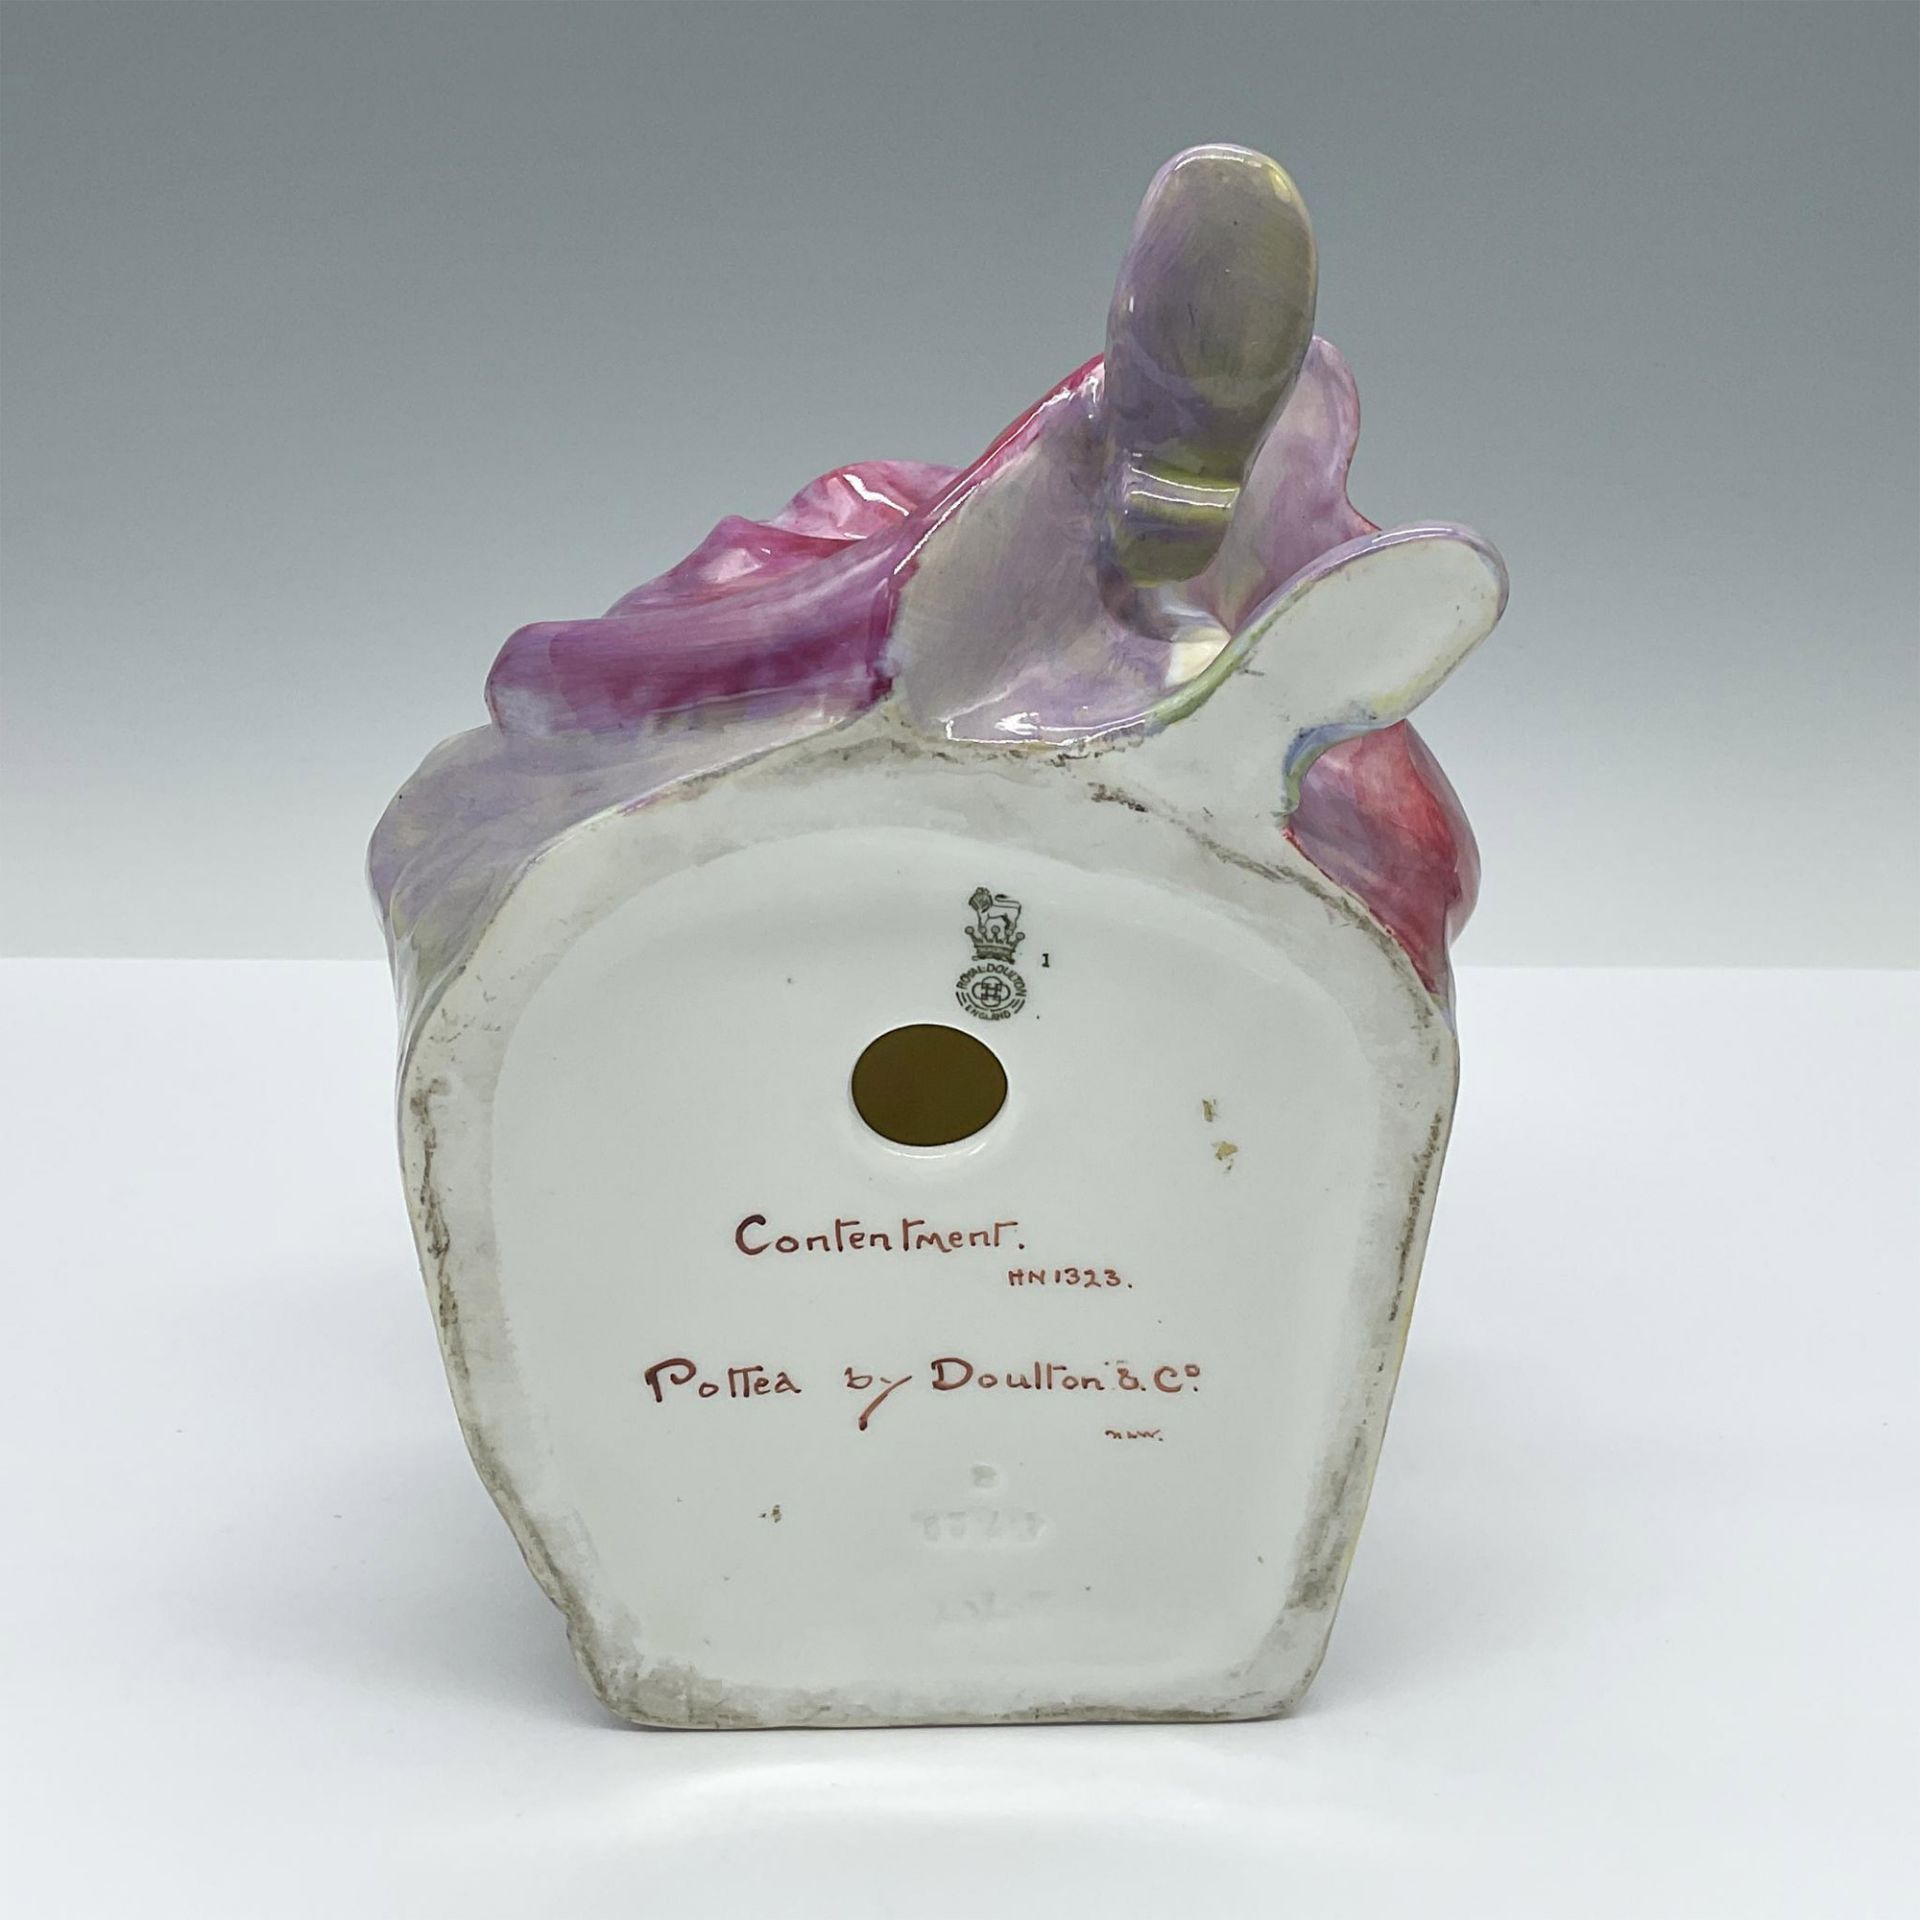 Contentment - HN1323 - Royal Doulton Figurine - Image 3 of 3